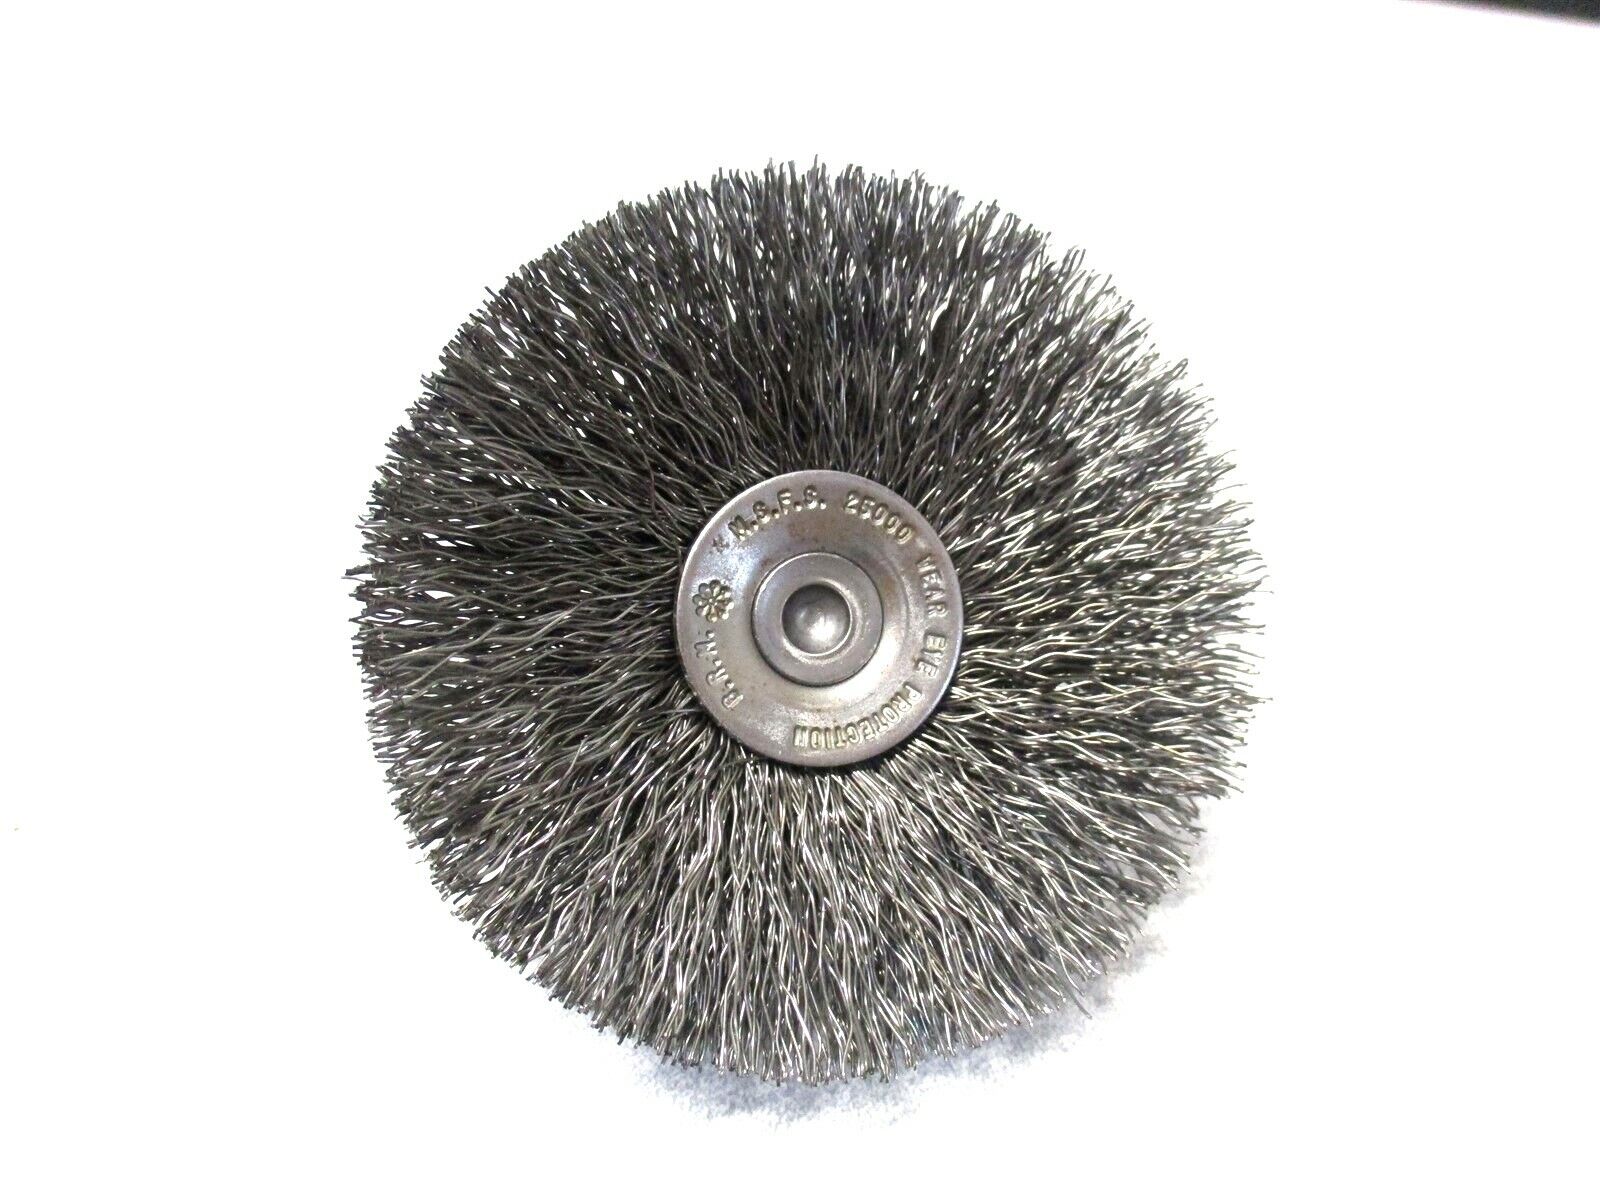 BRM (BMF3012) 3 x 1/4 x 3 1.18 Wire Carbon Steel Flared Crimped End Brush - 3 PC Brush Research MFG BMF3012